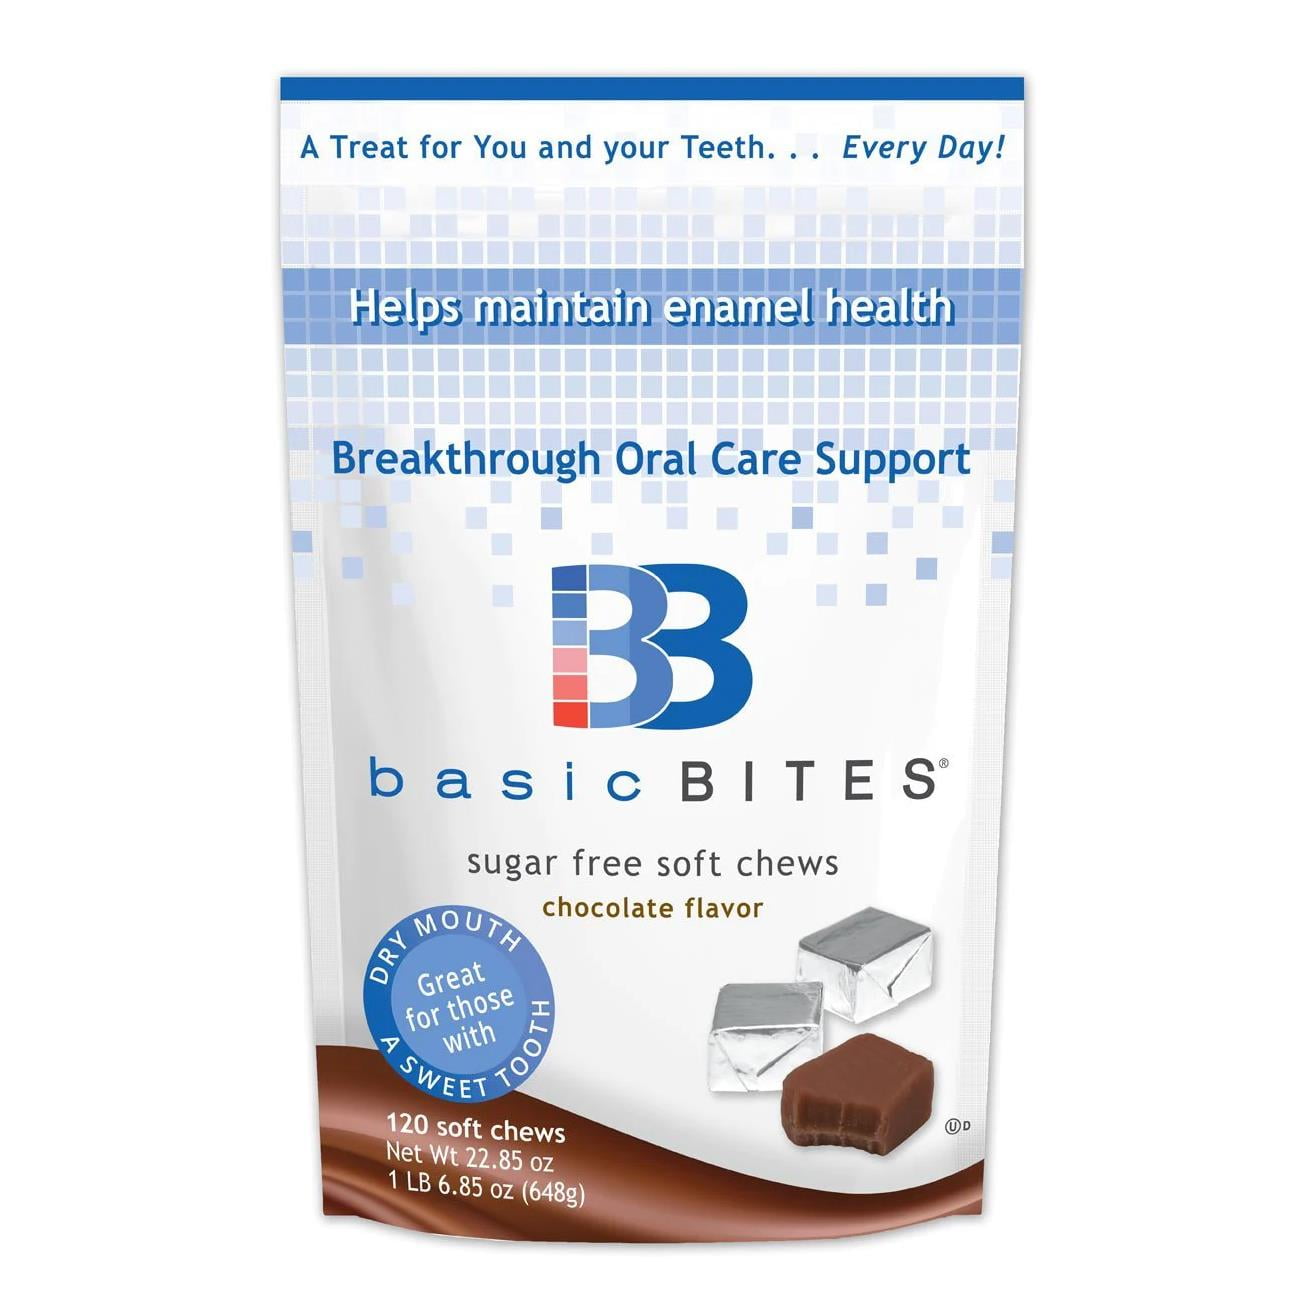 BasicBites Chocolate Soft Chews 120ct Dry Mouth Oral Care Enamel